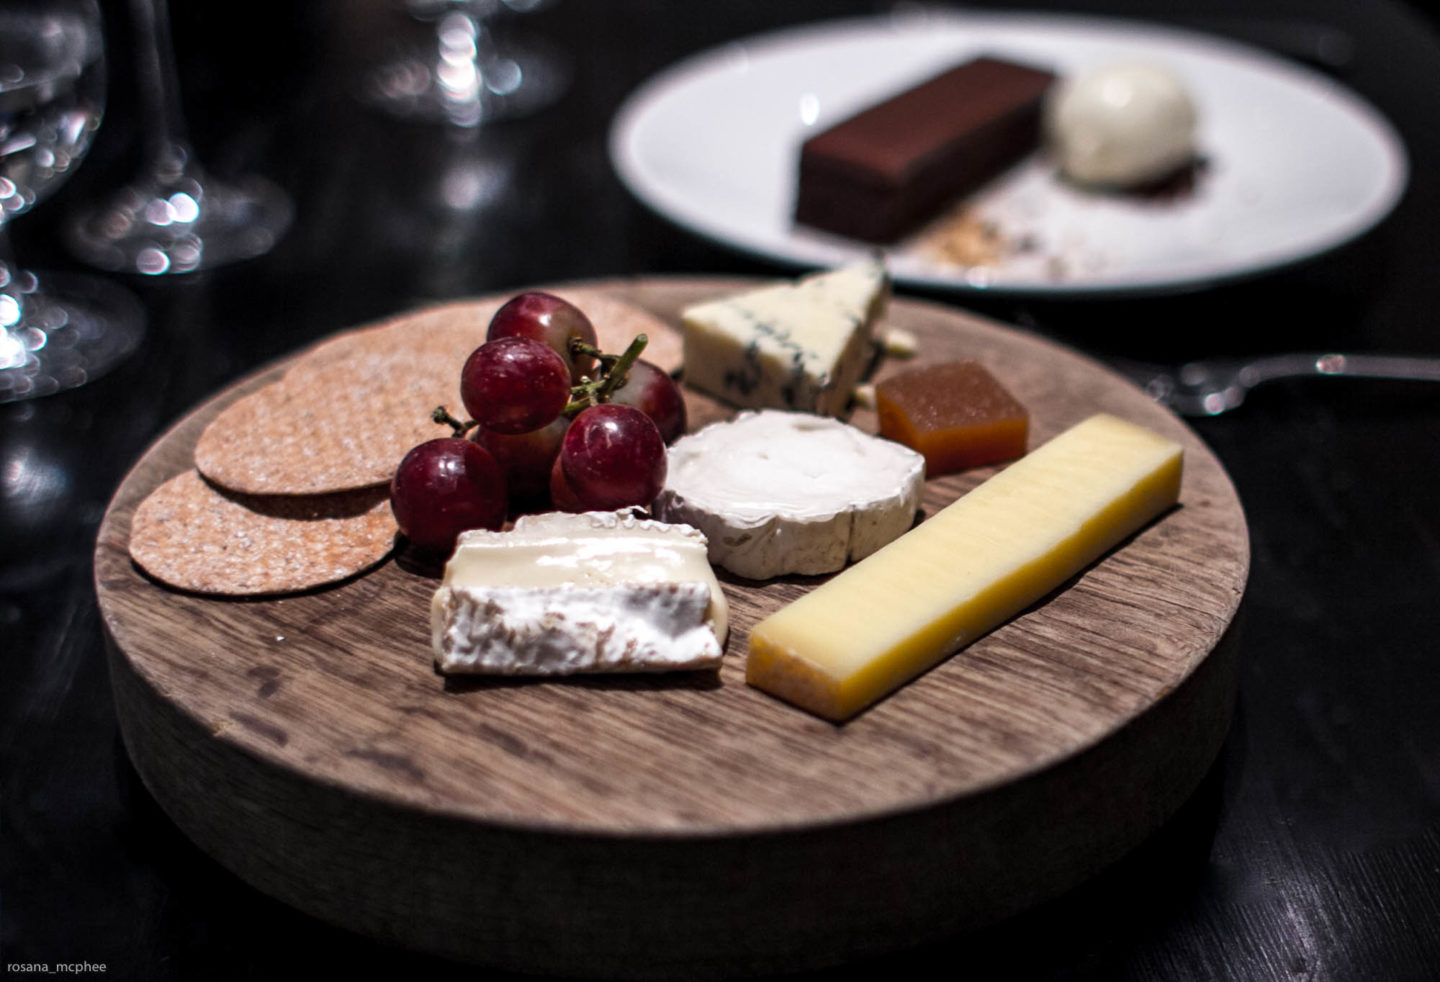 selection of British cheeses - cow, sheep and goats cheeses, with quince jelly and crackers